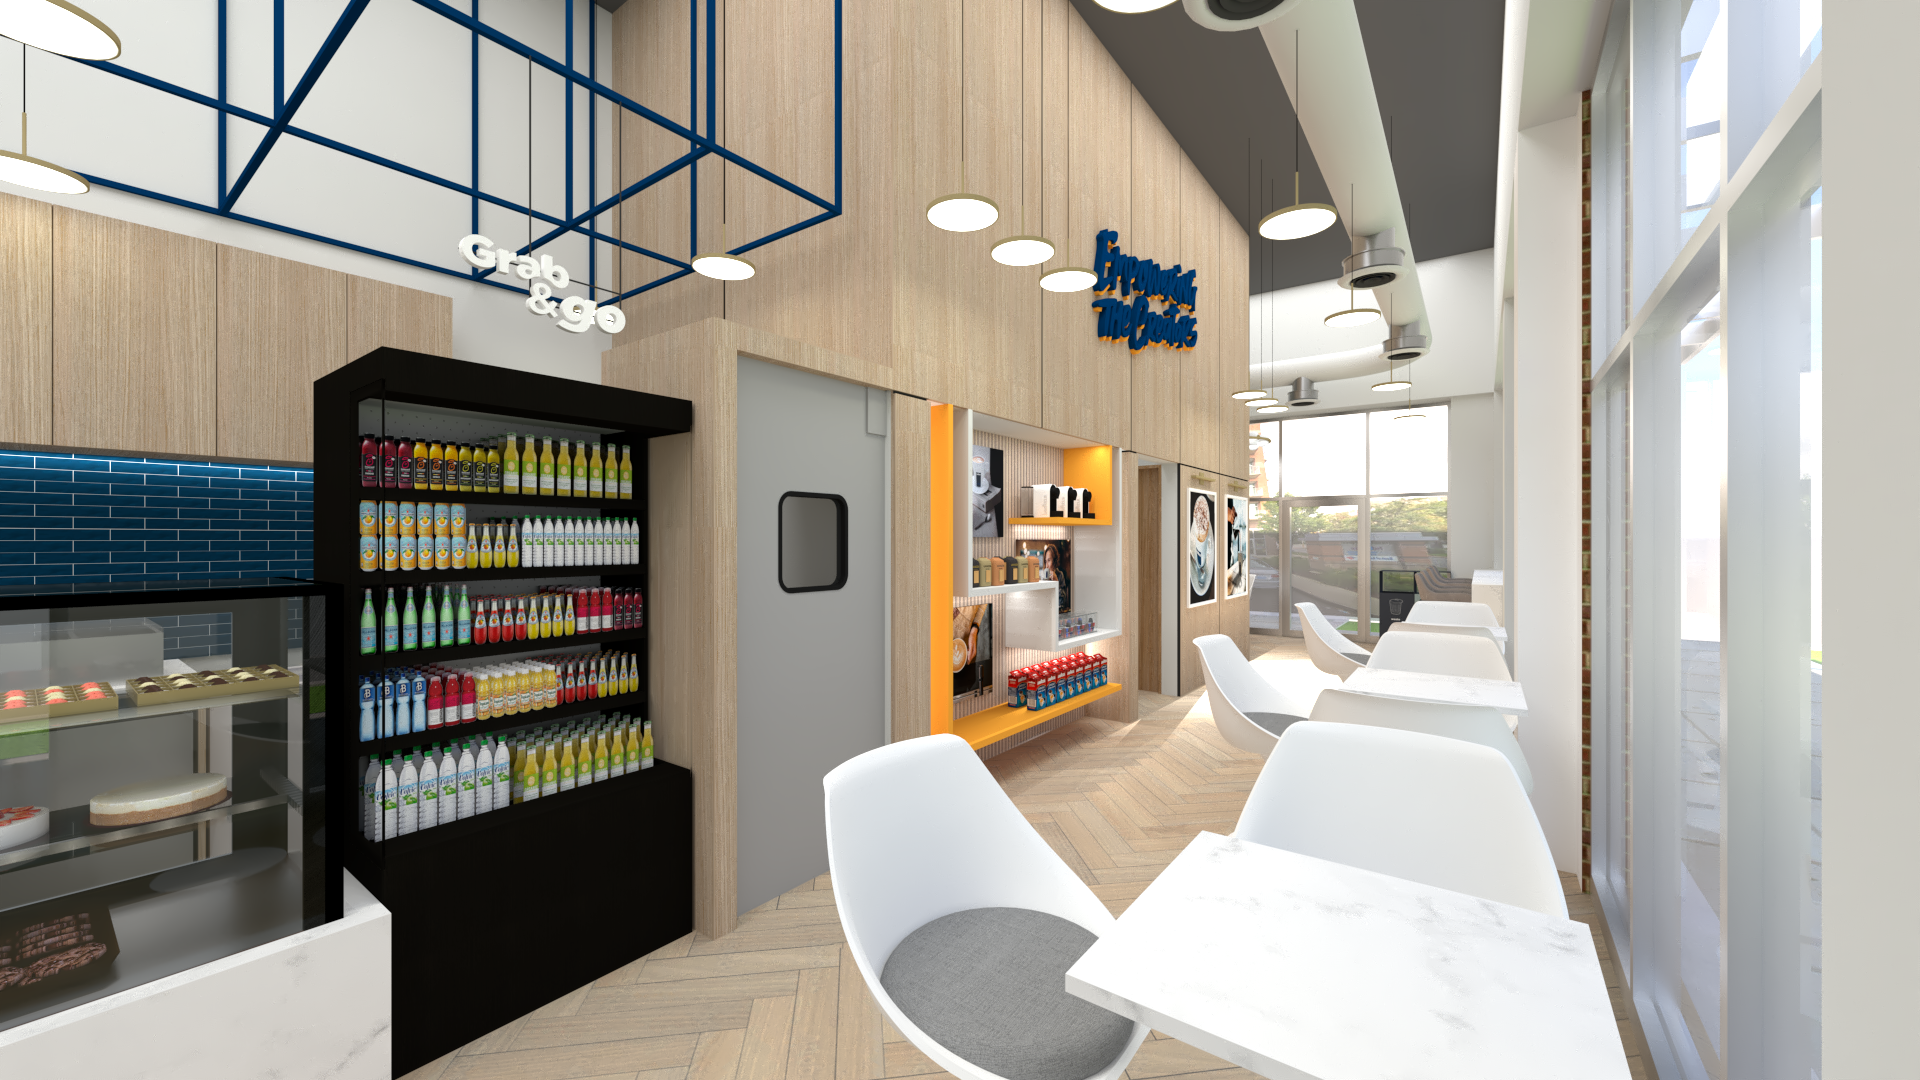 Look inside the new Qargo Coffee coming to Detroit's Midtown